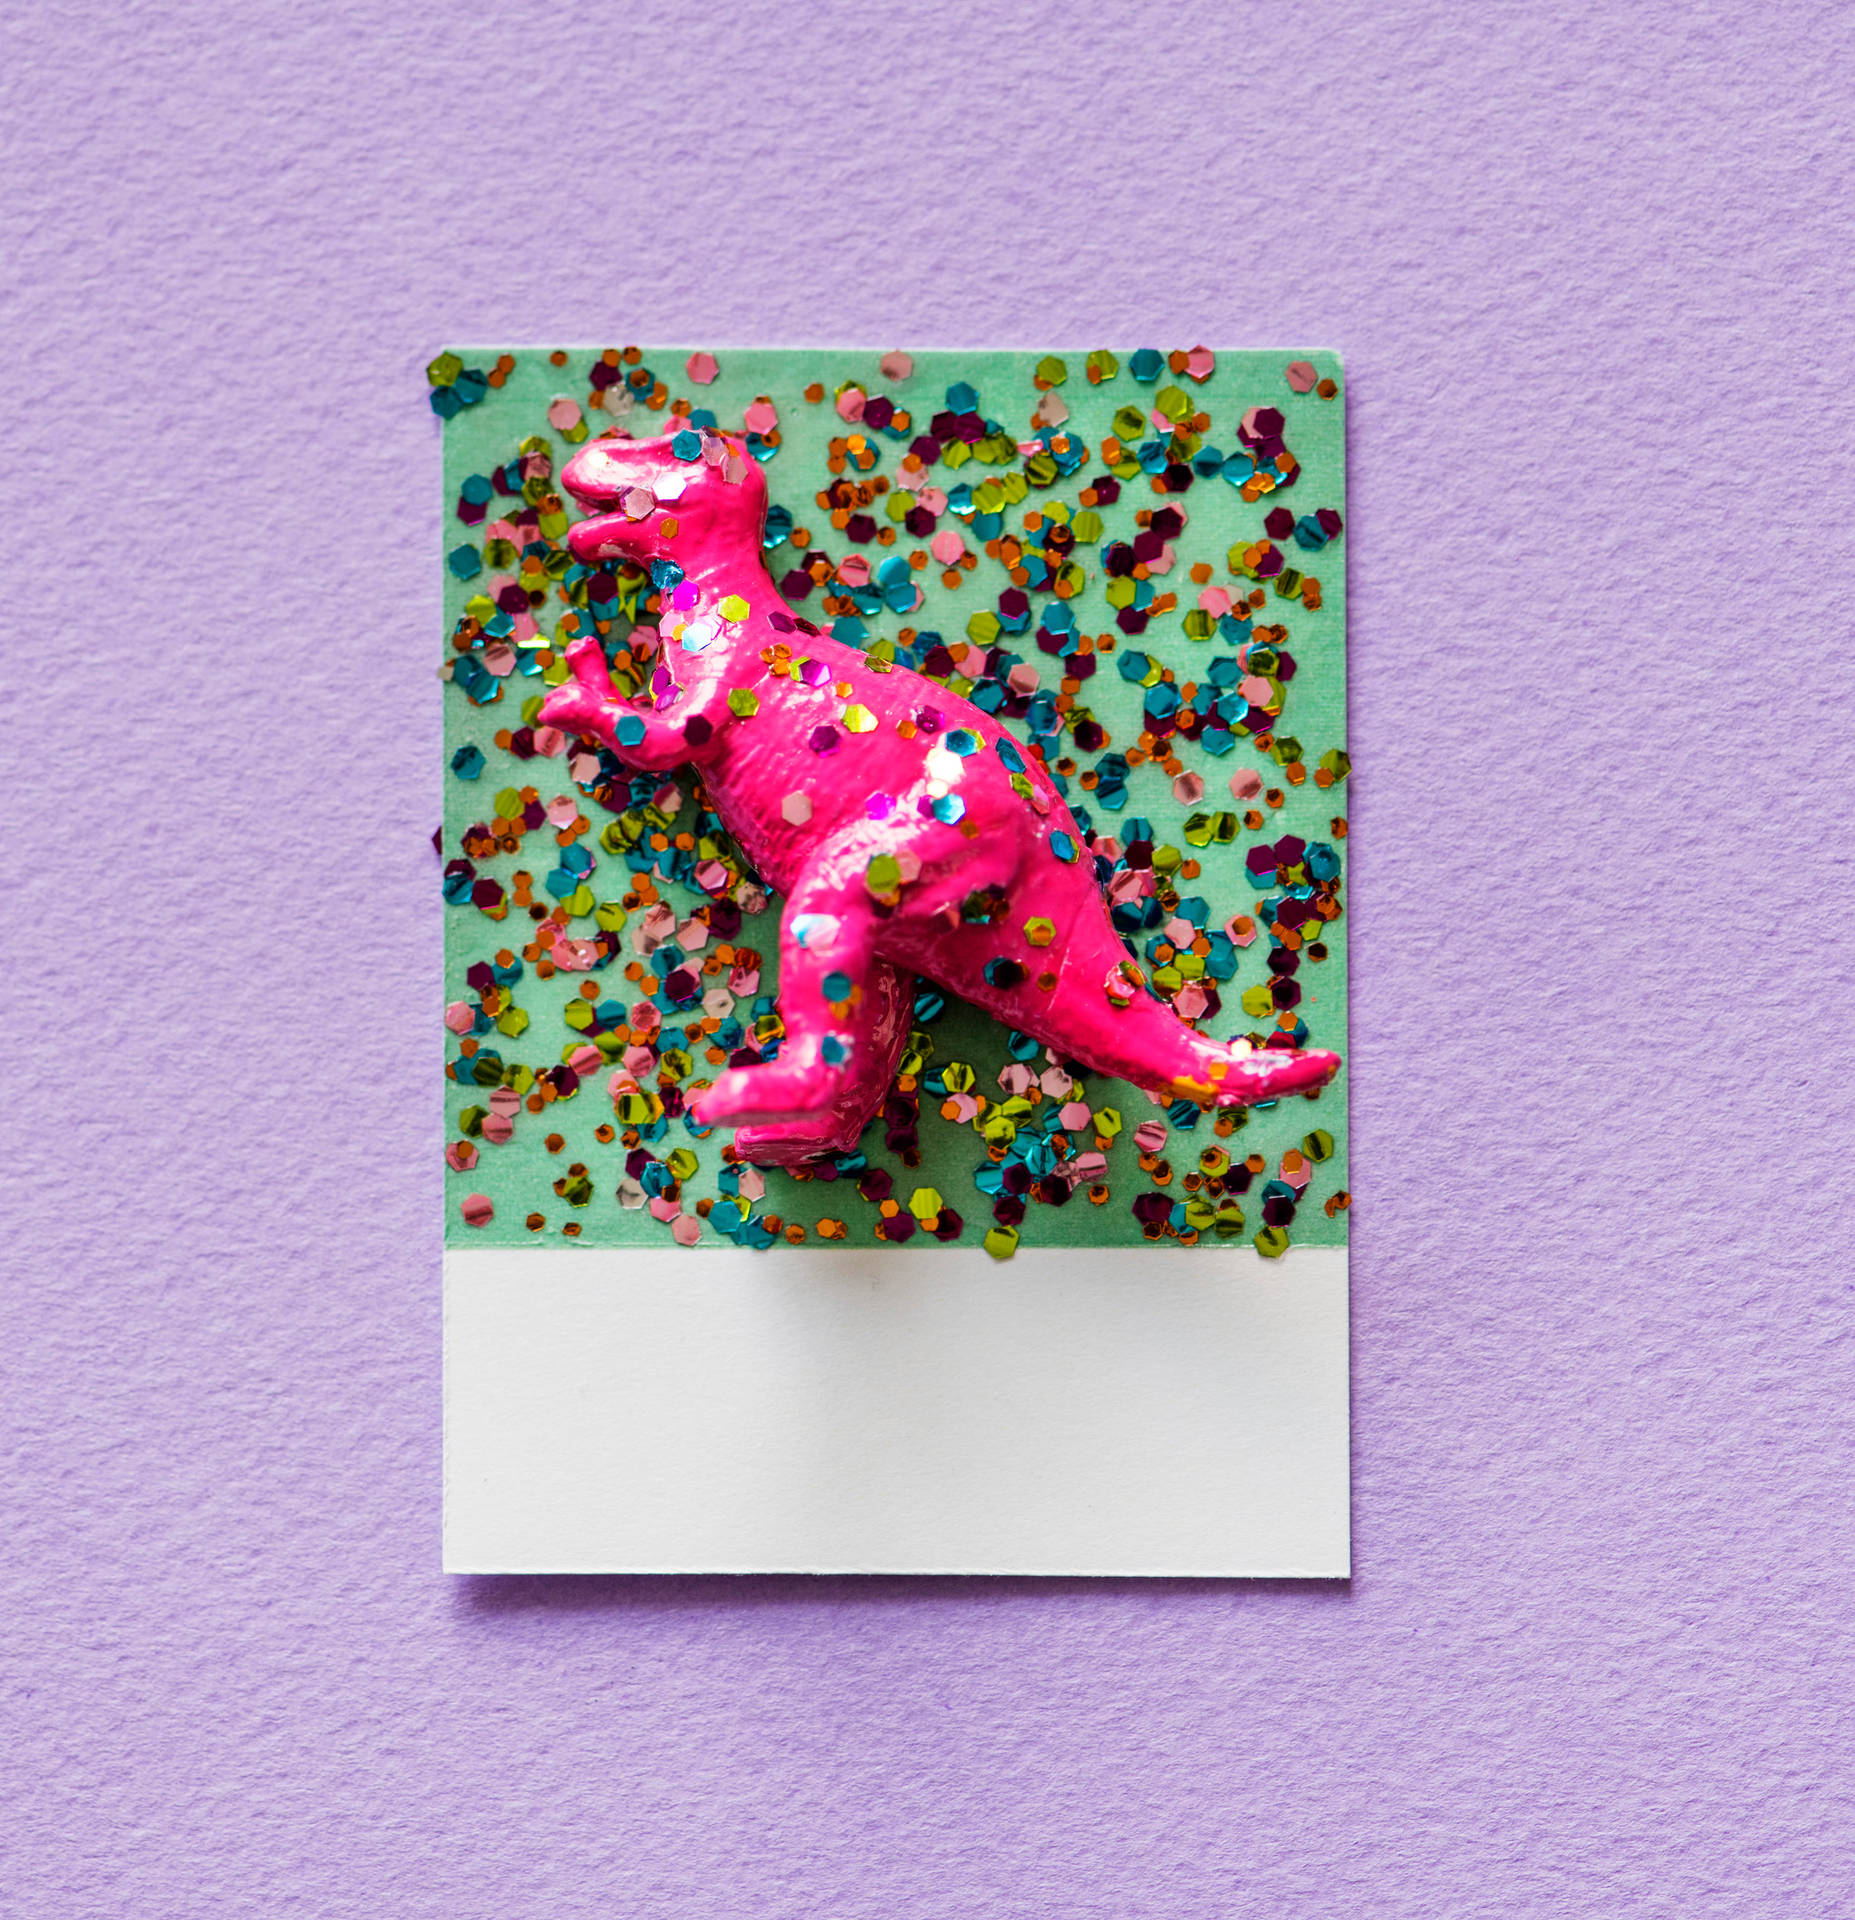 Cute Dinosaur Toy With Confetti Background